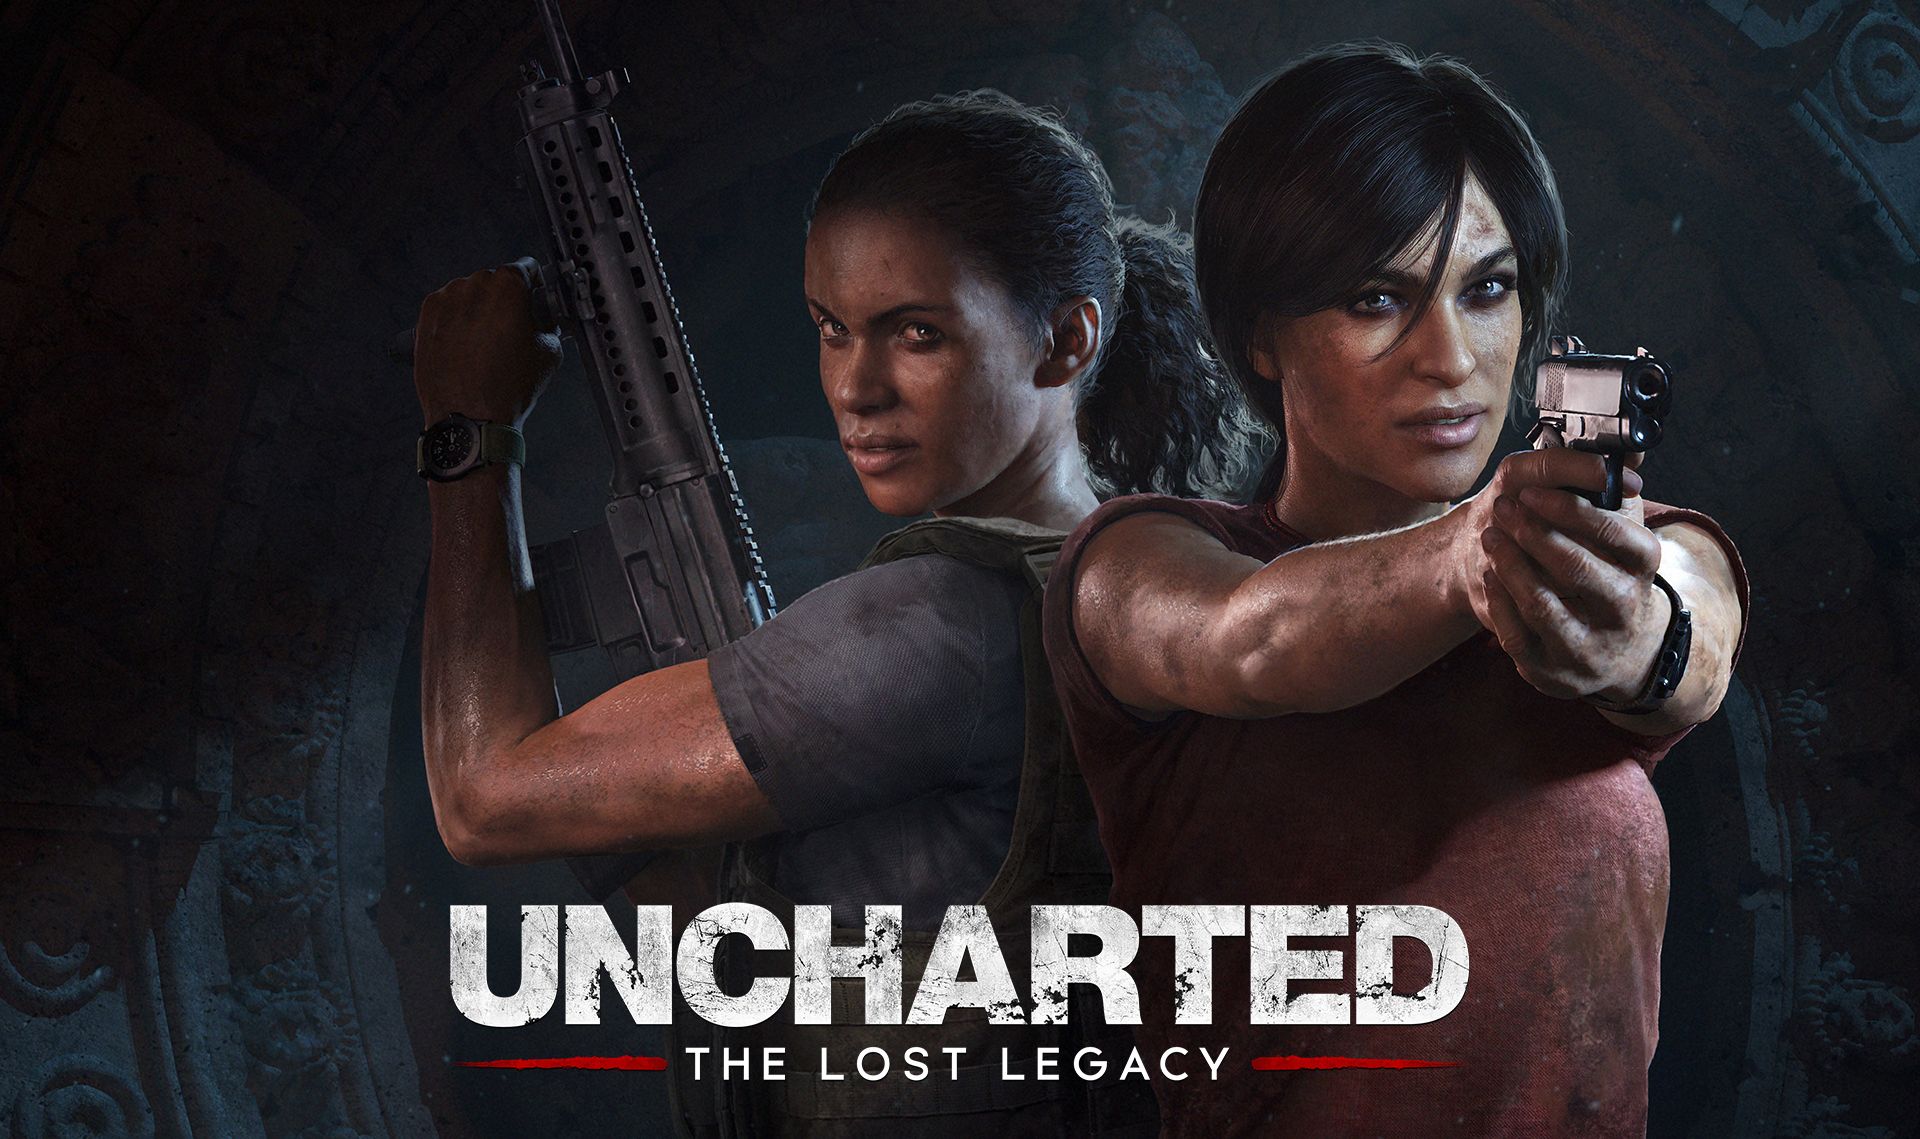 Game review of Uncharted: The Lost Legacy